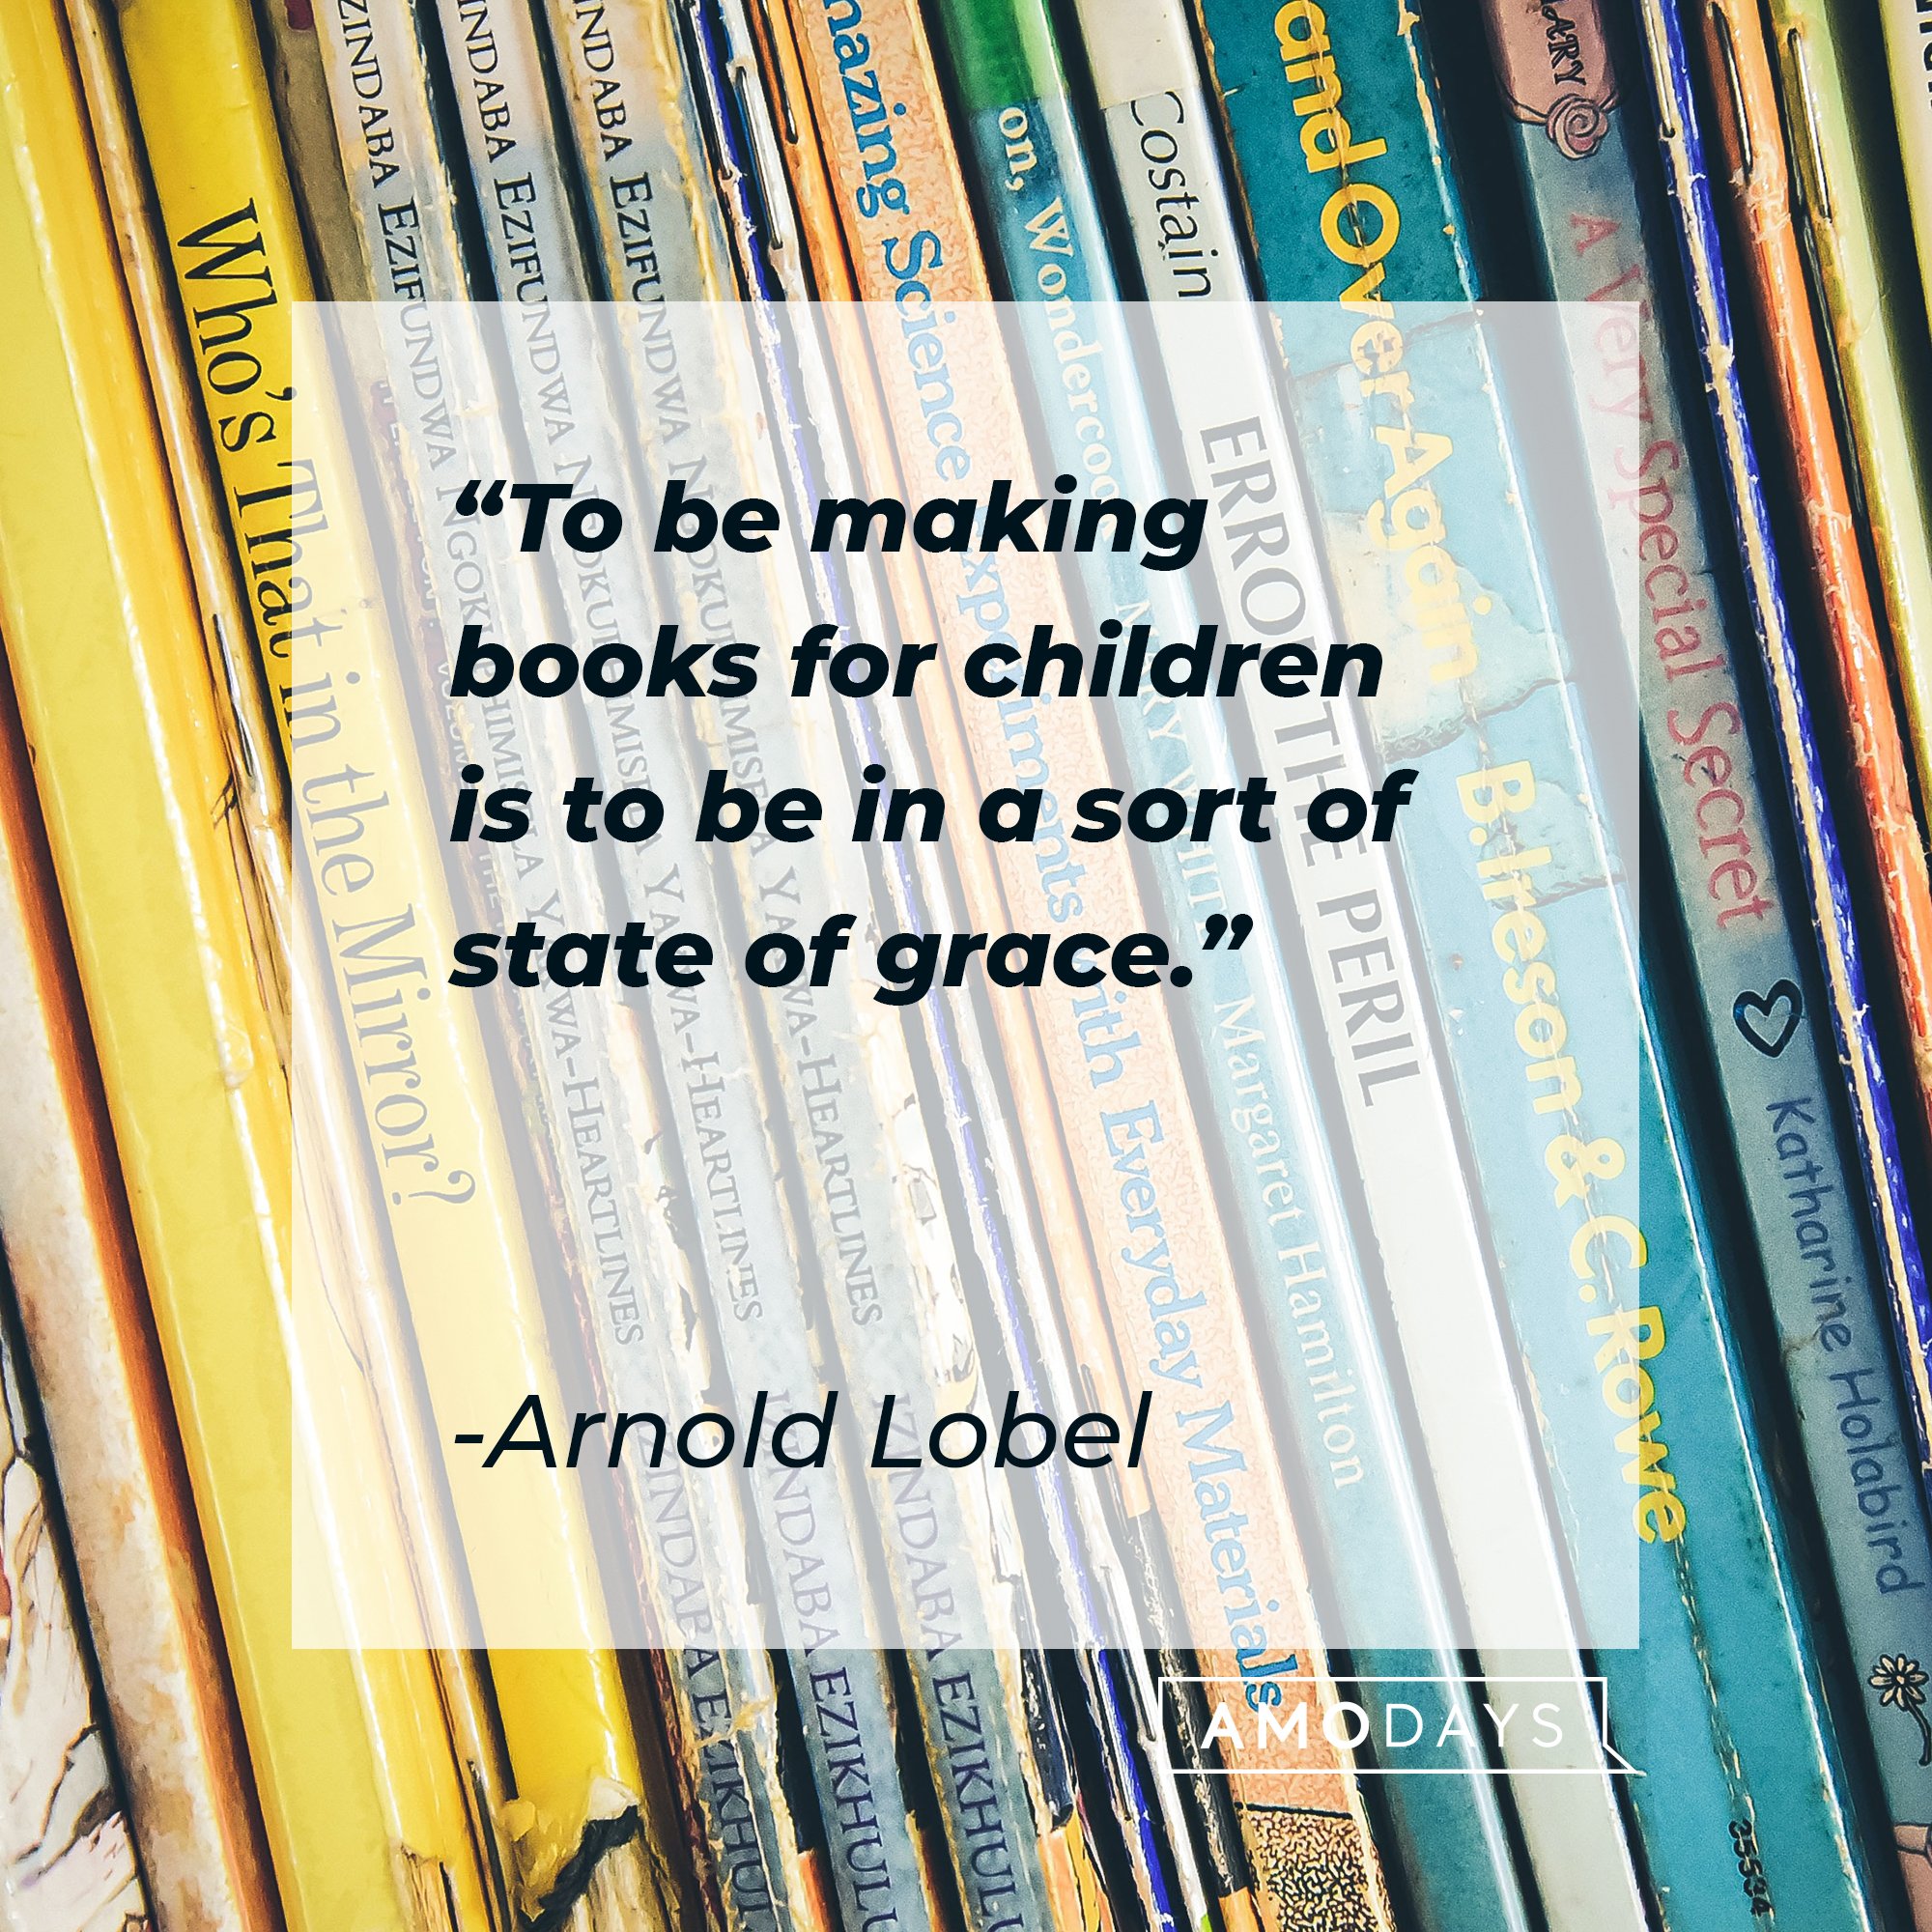 Arnold Lobel’s quote: "To be making books for children is to be in a sort of state of grace." | Image: AmoDays